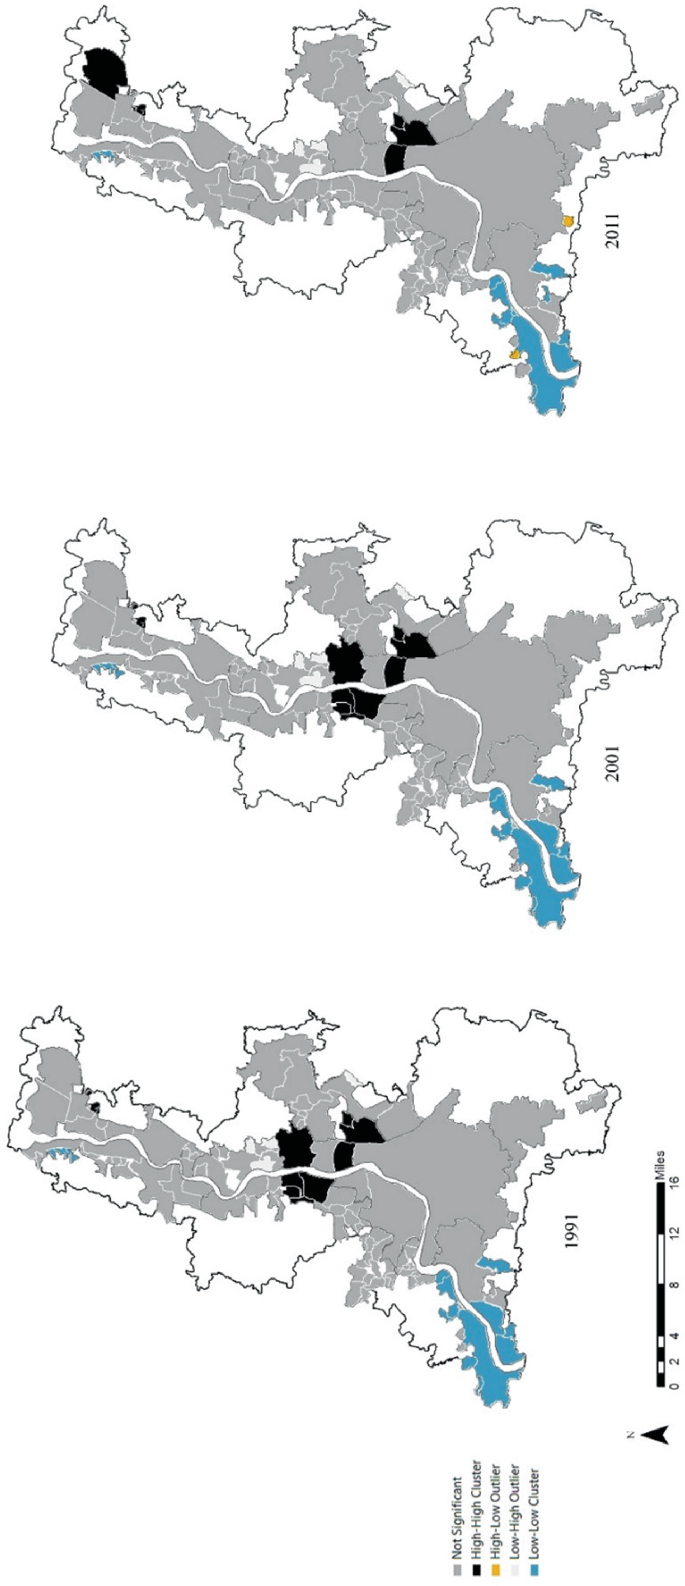 3 maps of Kolkata Urban Agglomeration present the distribution of results for L I S A for the years 1991, 2001, and, 2011. In 1991 and 2001, a high-to-high cluster is observed at the core which shrinks in 2011 with an appearance of the high-to-high cluster in the outer periphery in the north.